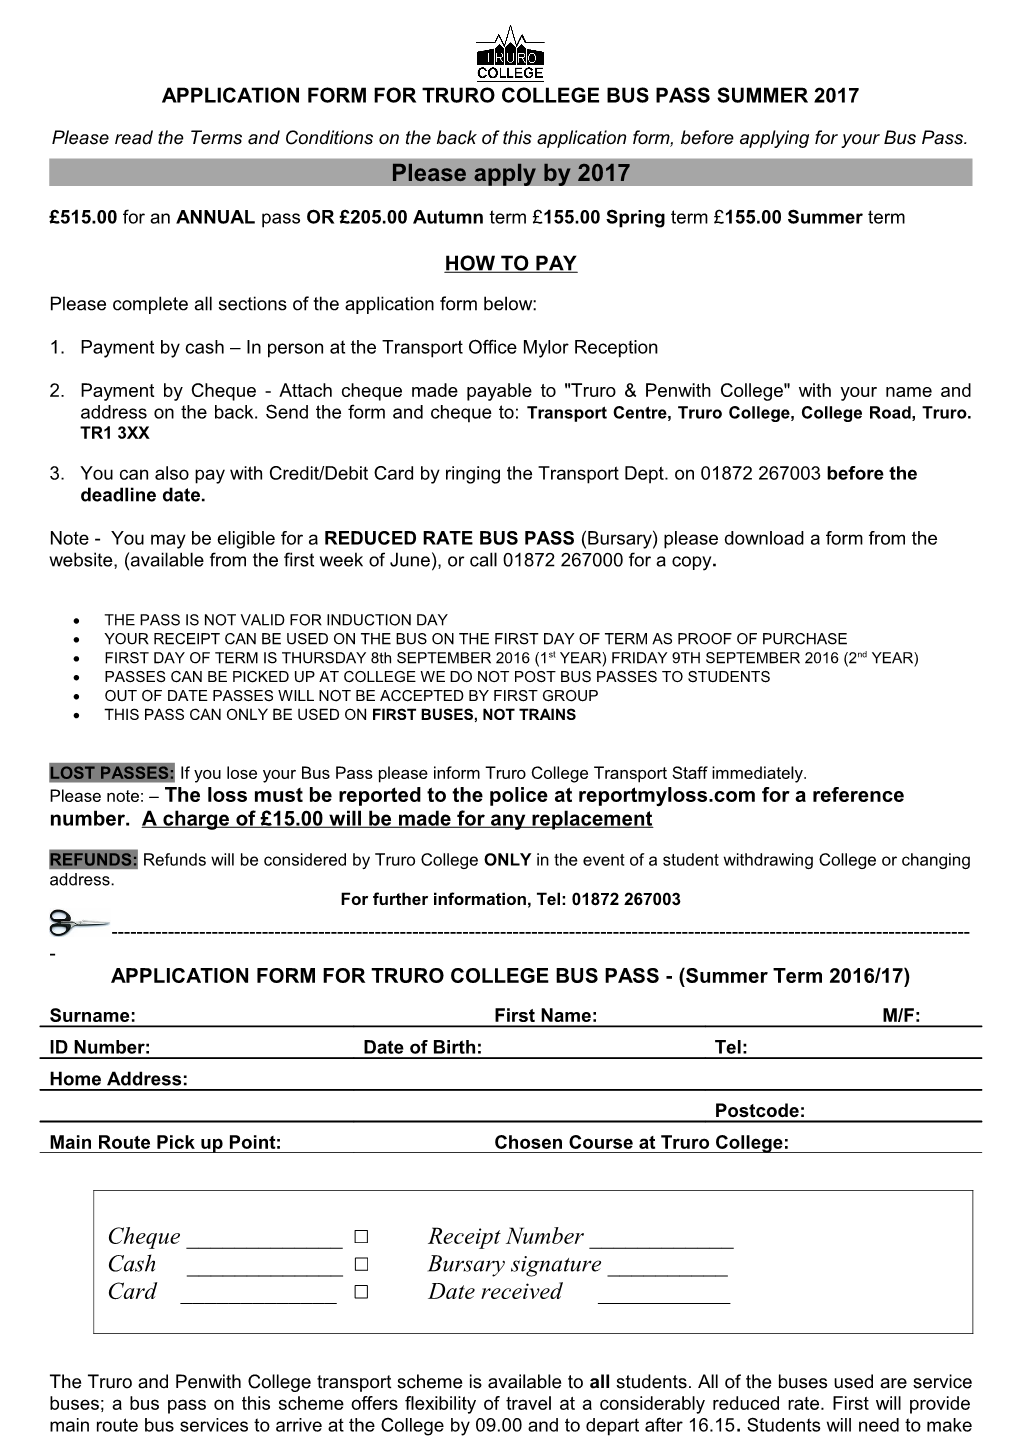 Application Form for Truro College Bus Pass Summer 2017